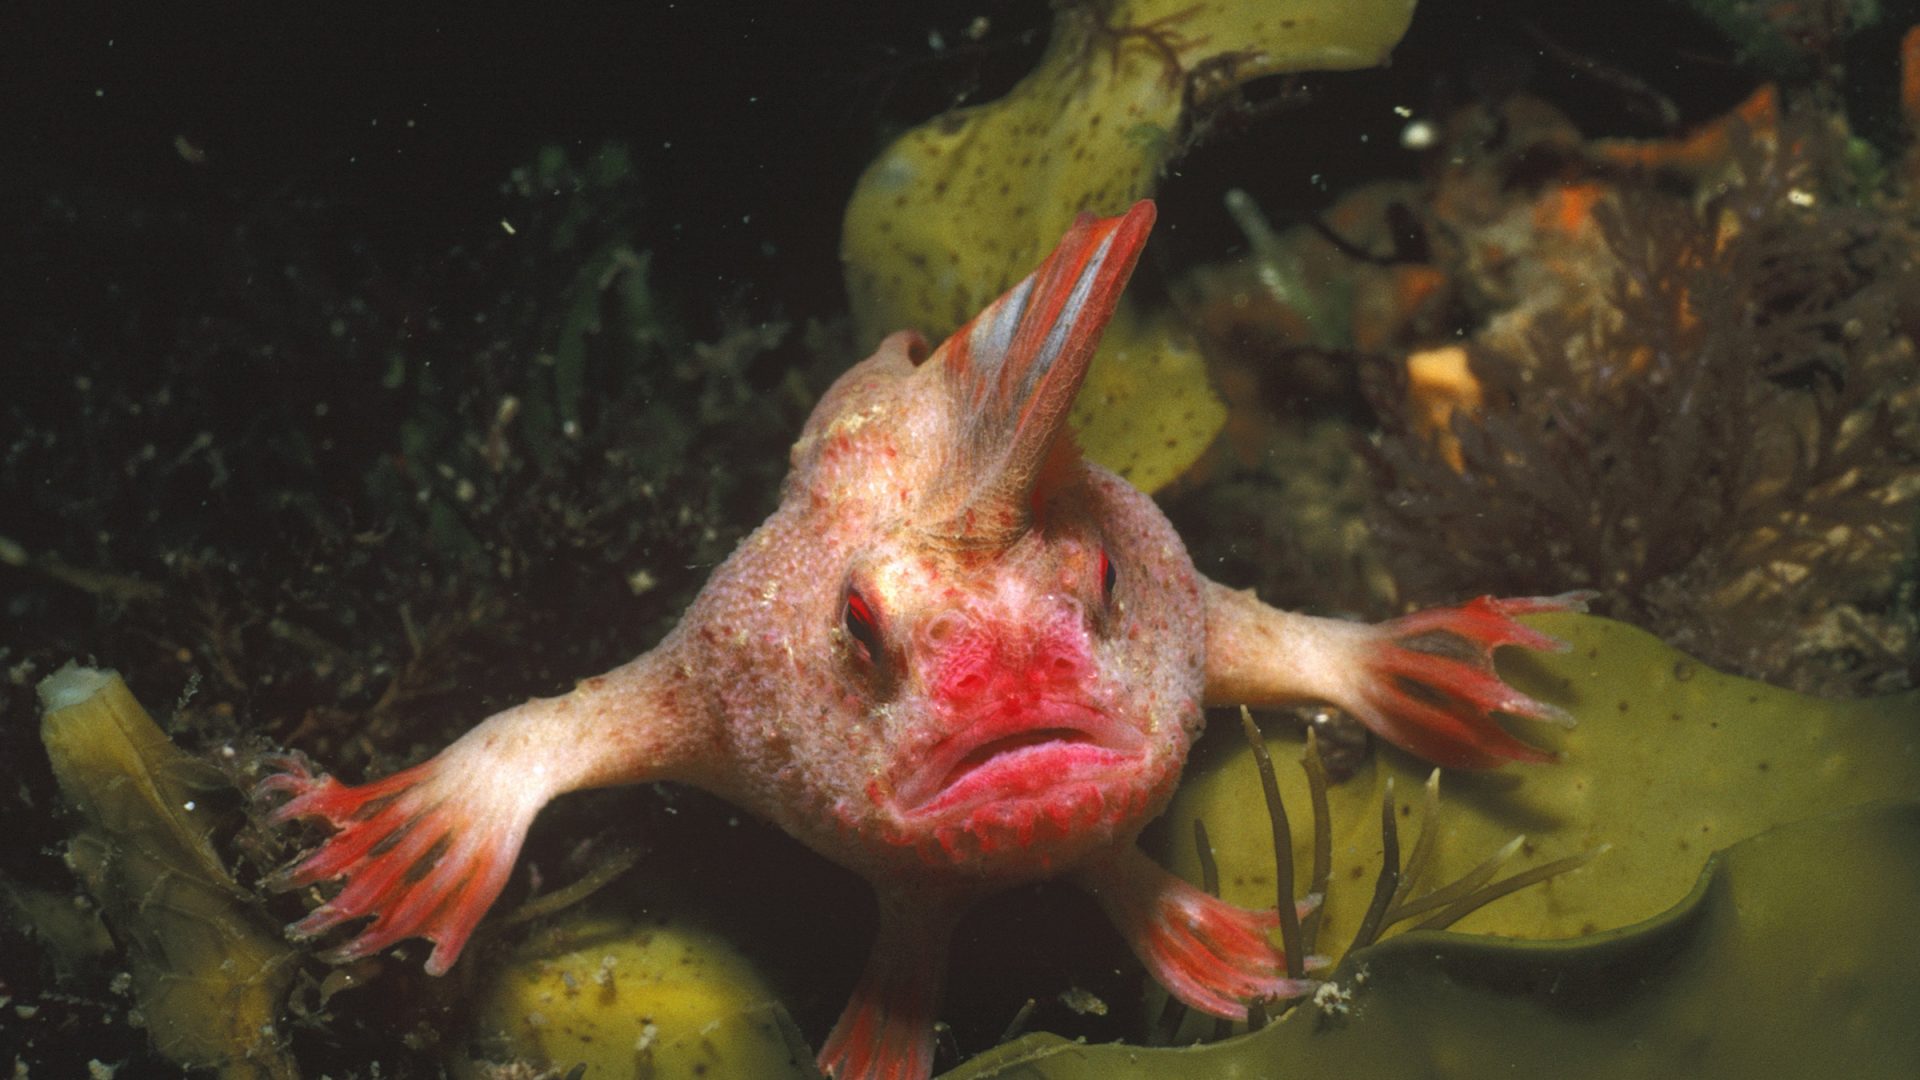 RIP, relaxed handfish. You had been extraordinary, and now you’re extinct.